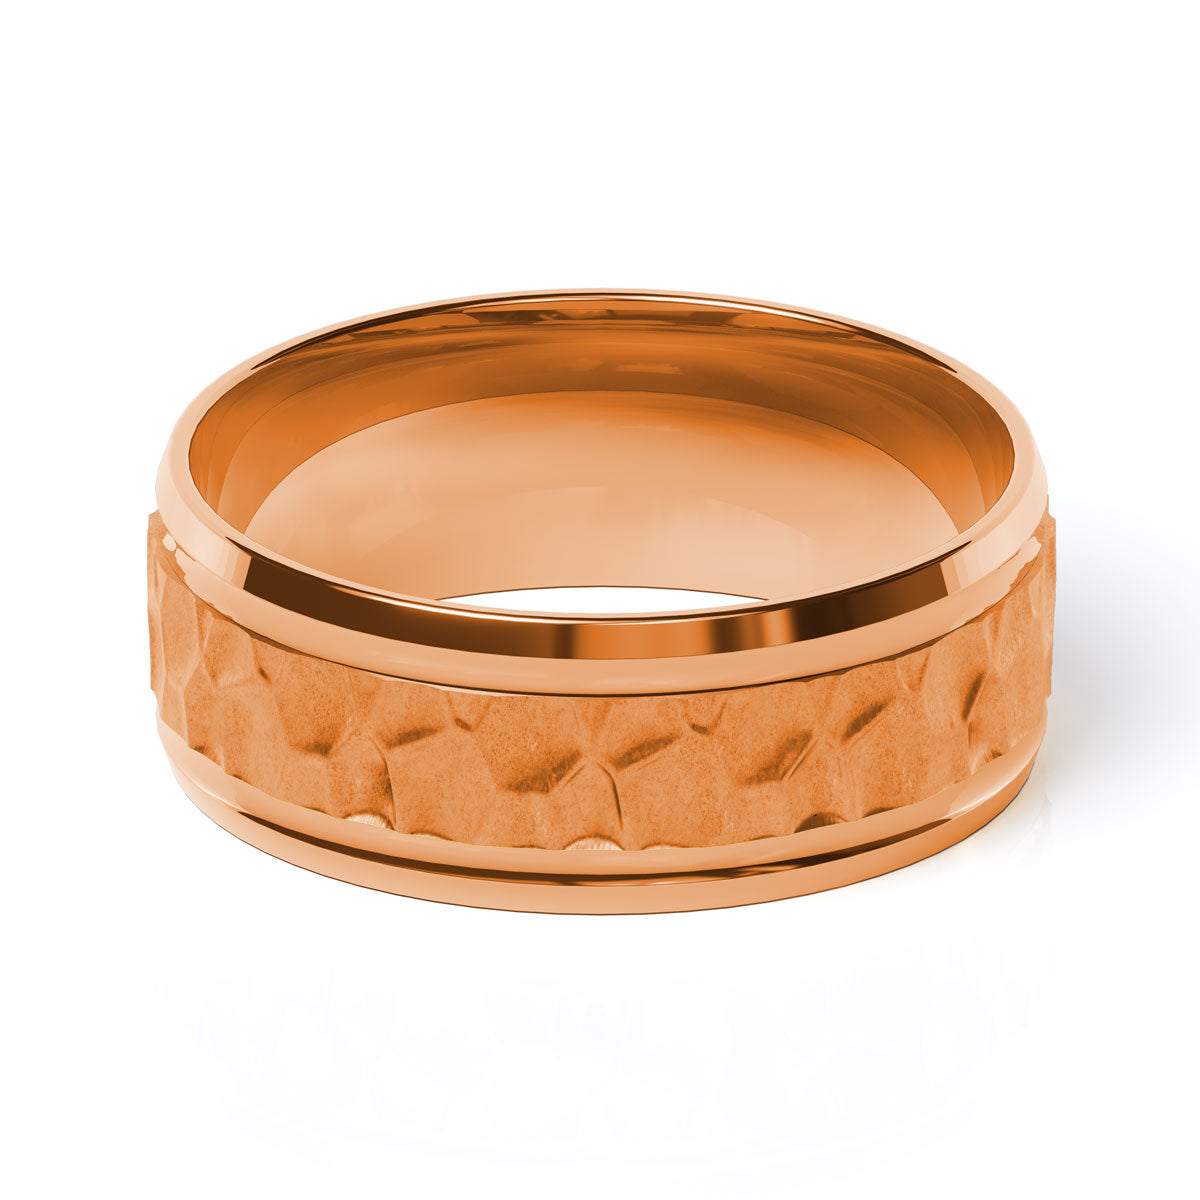 Comfort Fit 8MM Carved Wedding Band with Hammered Inlay